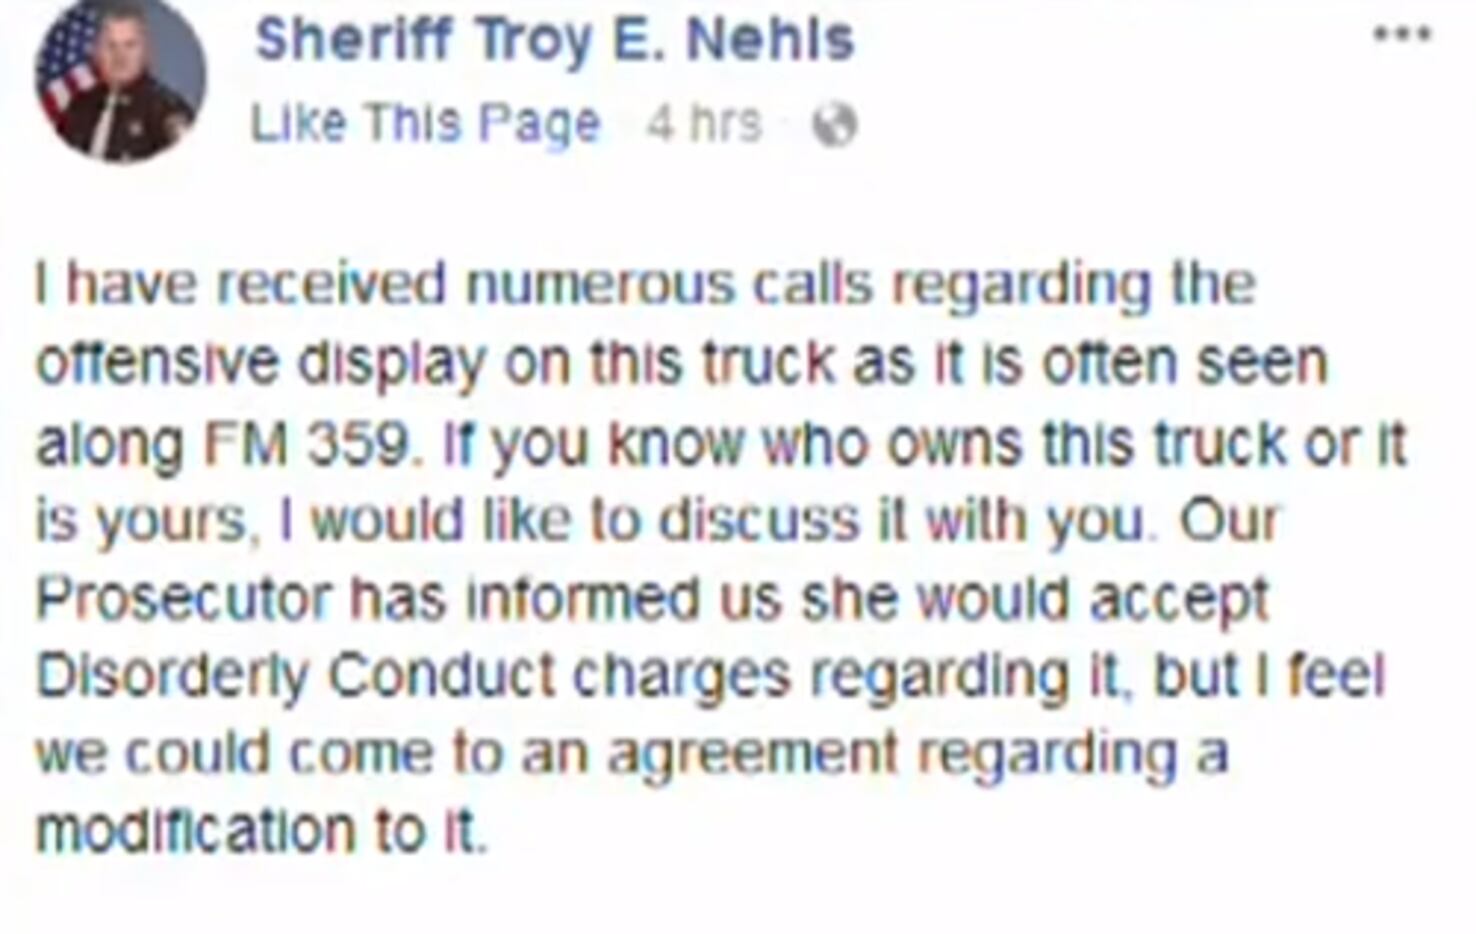 The sheriff's Facebook post has since been deleted.